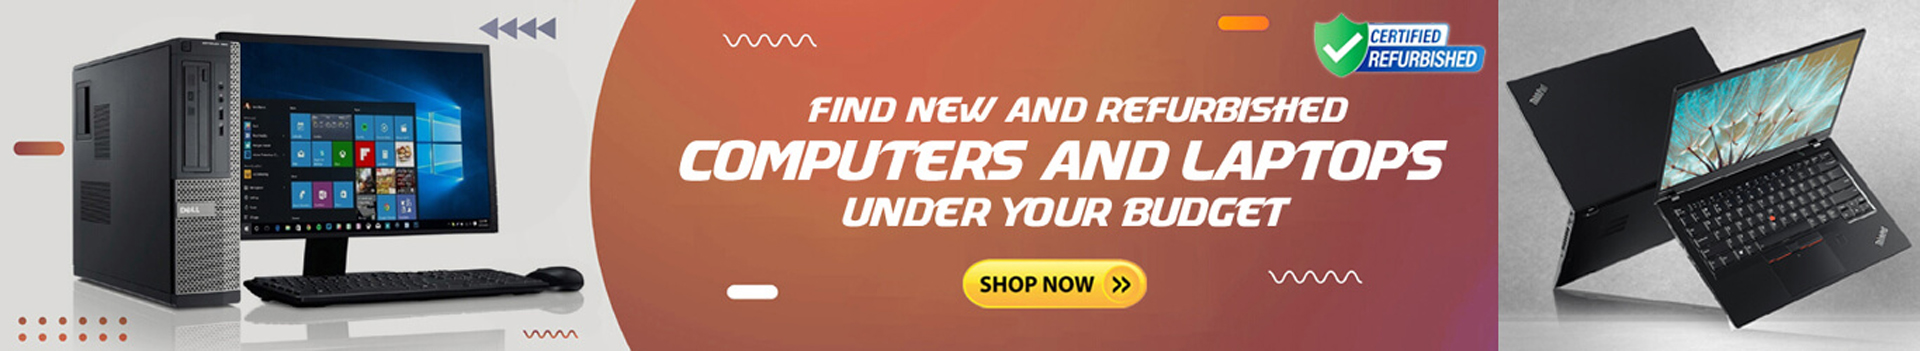 readymade-refurbished-computers-and-laptops-website-for-sale